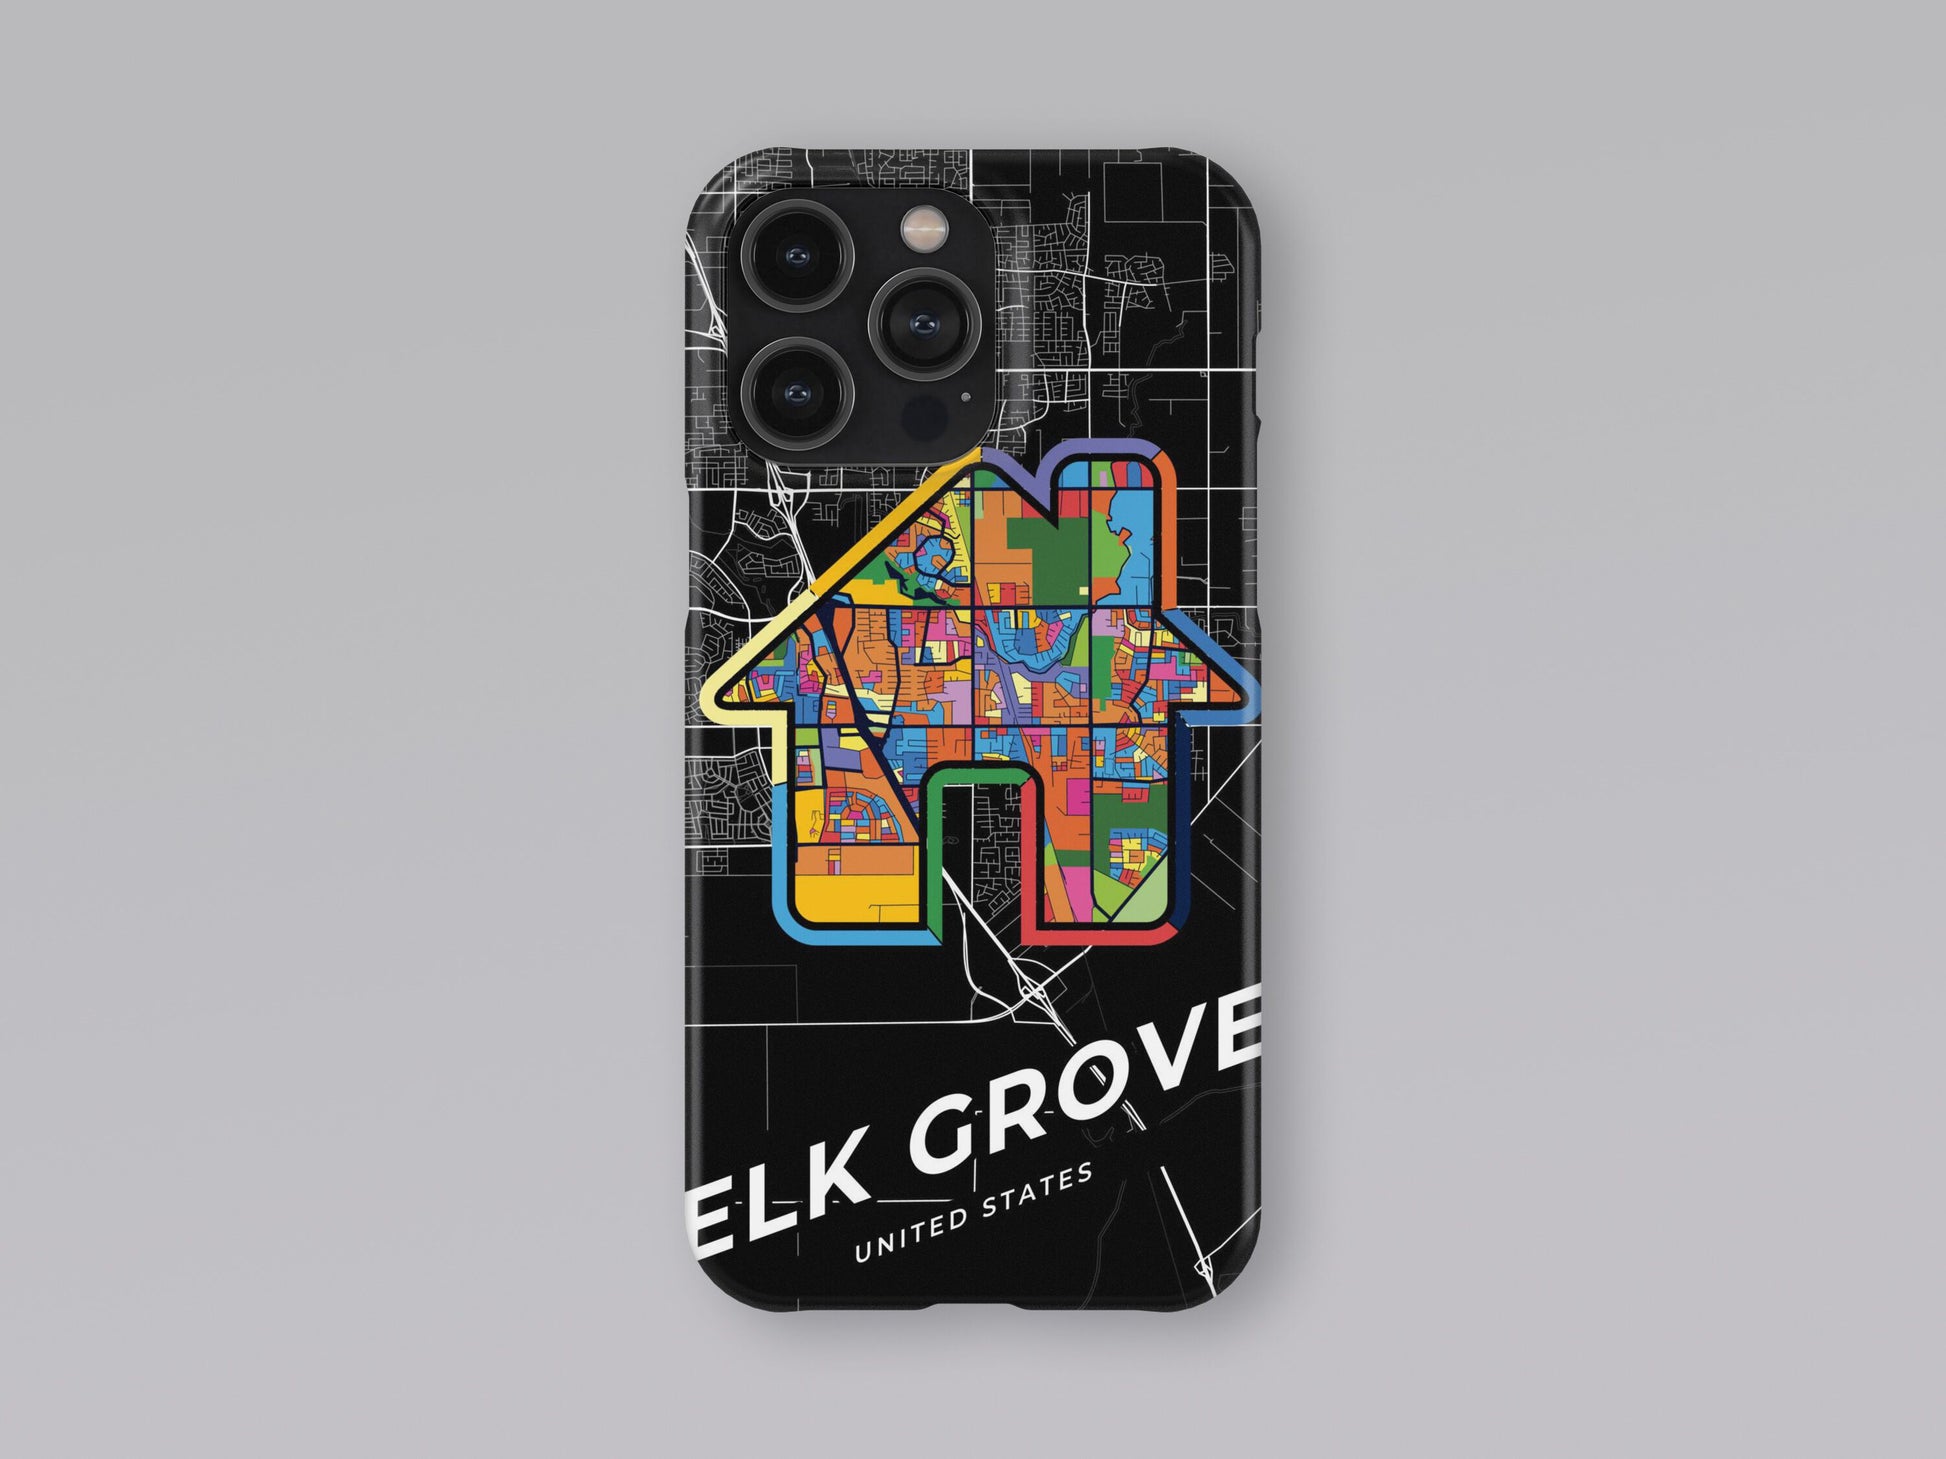 Elk Grove California slim phone case with colorful icon. Birthday, wedding or housewarming gift. Couple match cases. 3